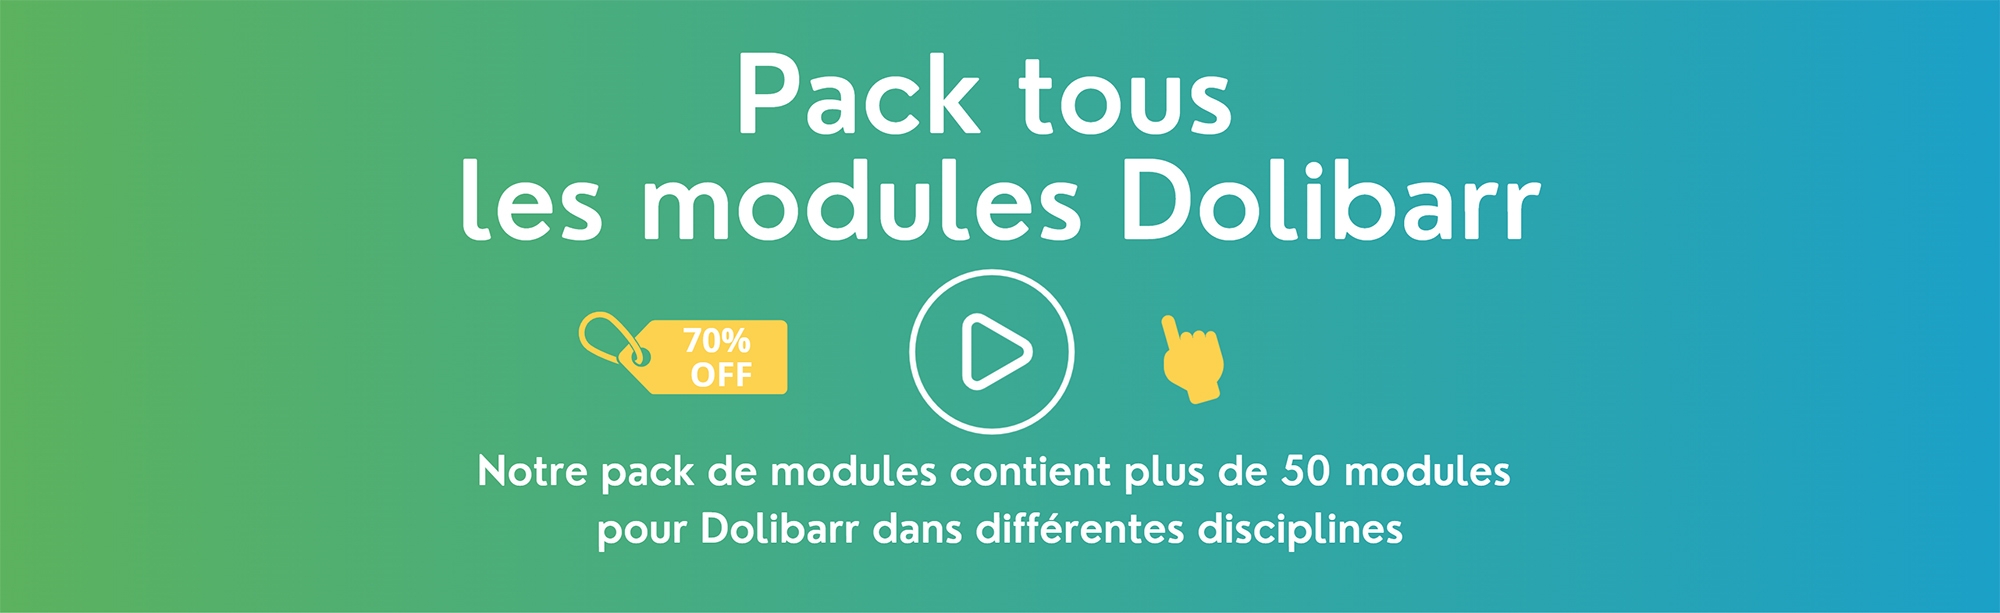 PACK ALL DOLIBARR MODULES